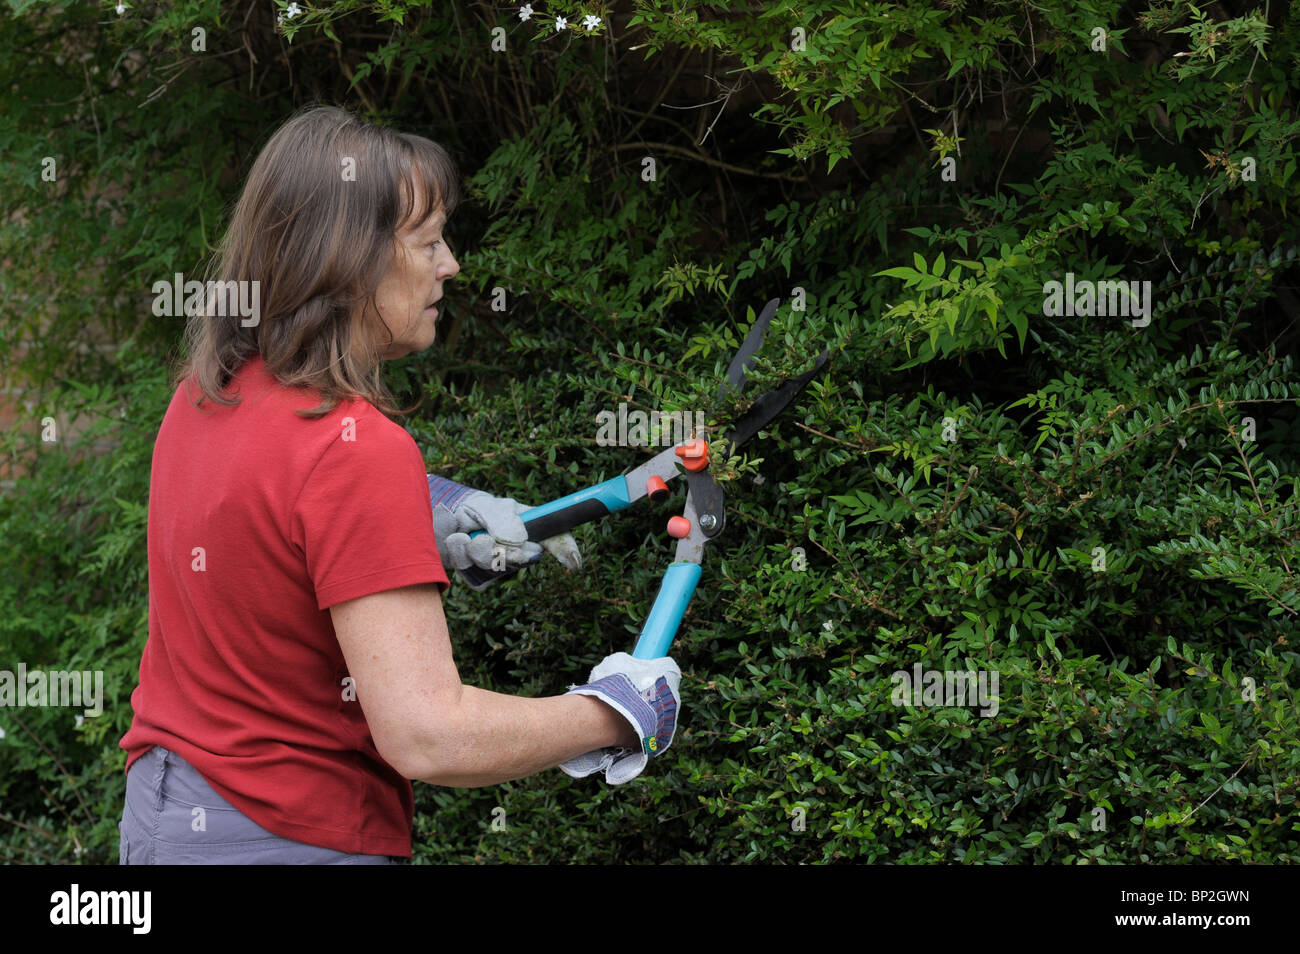 Women cutting hedge with hand shears Photos by Alan Edwards www.f2images.co.uk Stock Photo